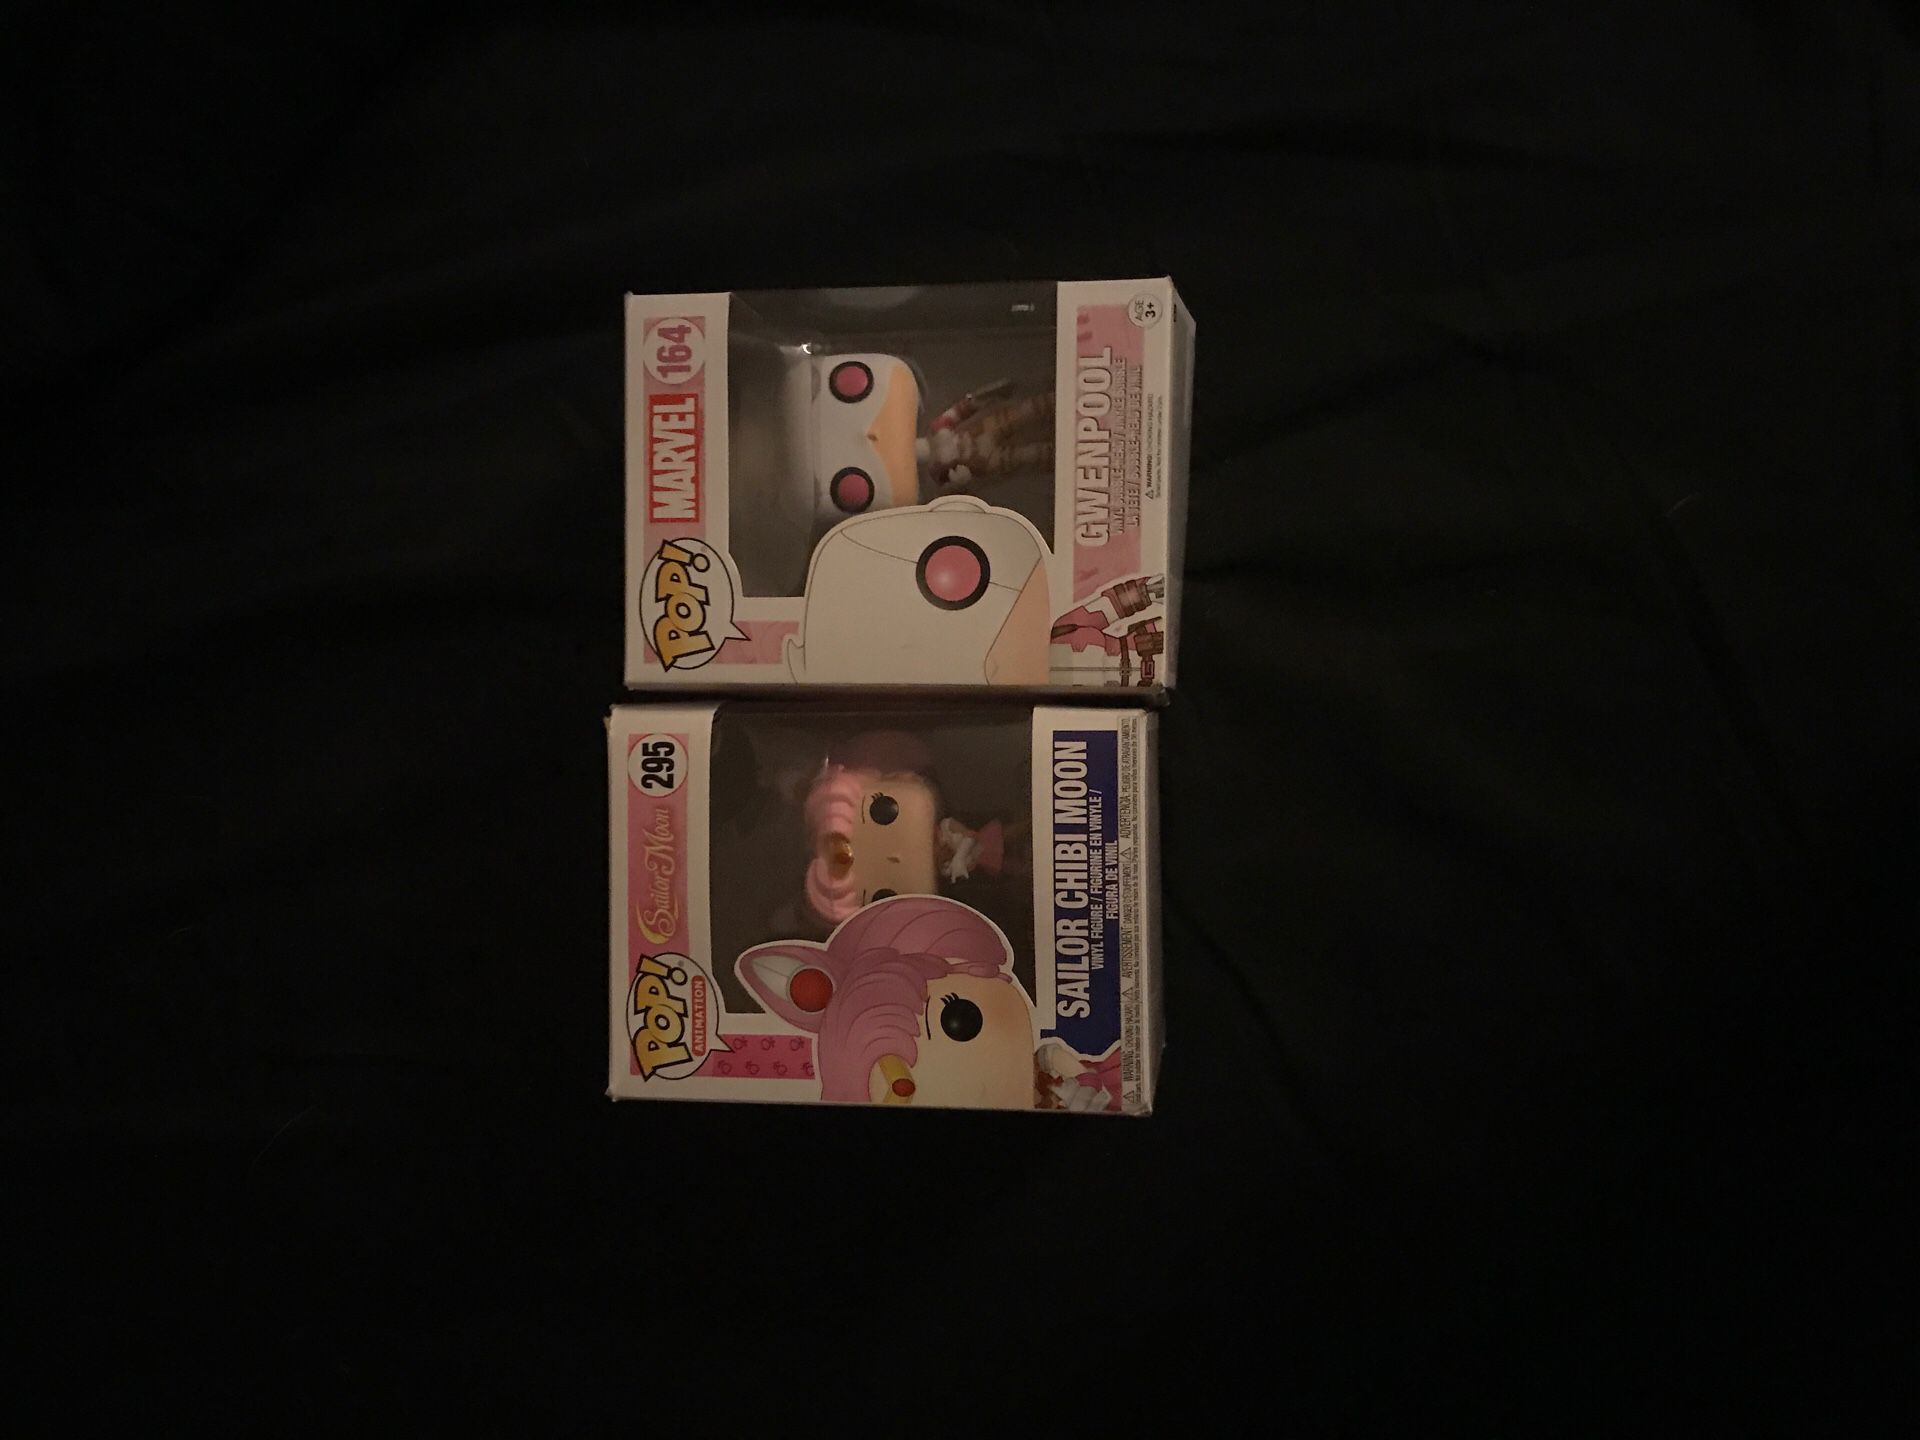 Sailor chibi moon and Gwenpool pops